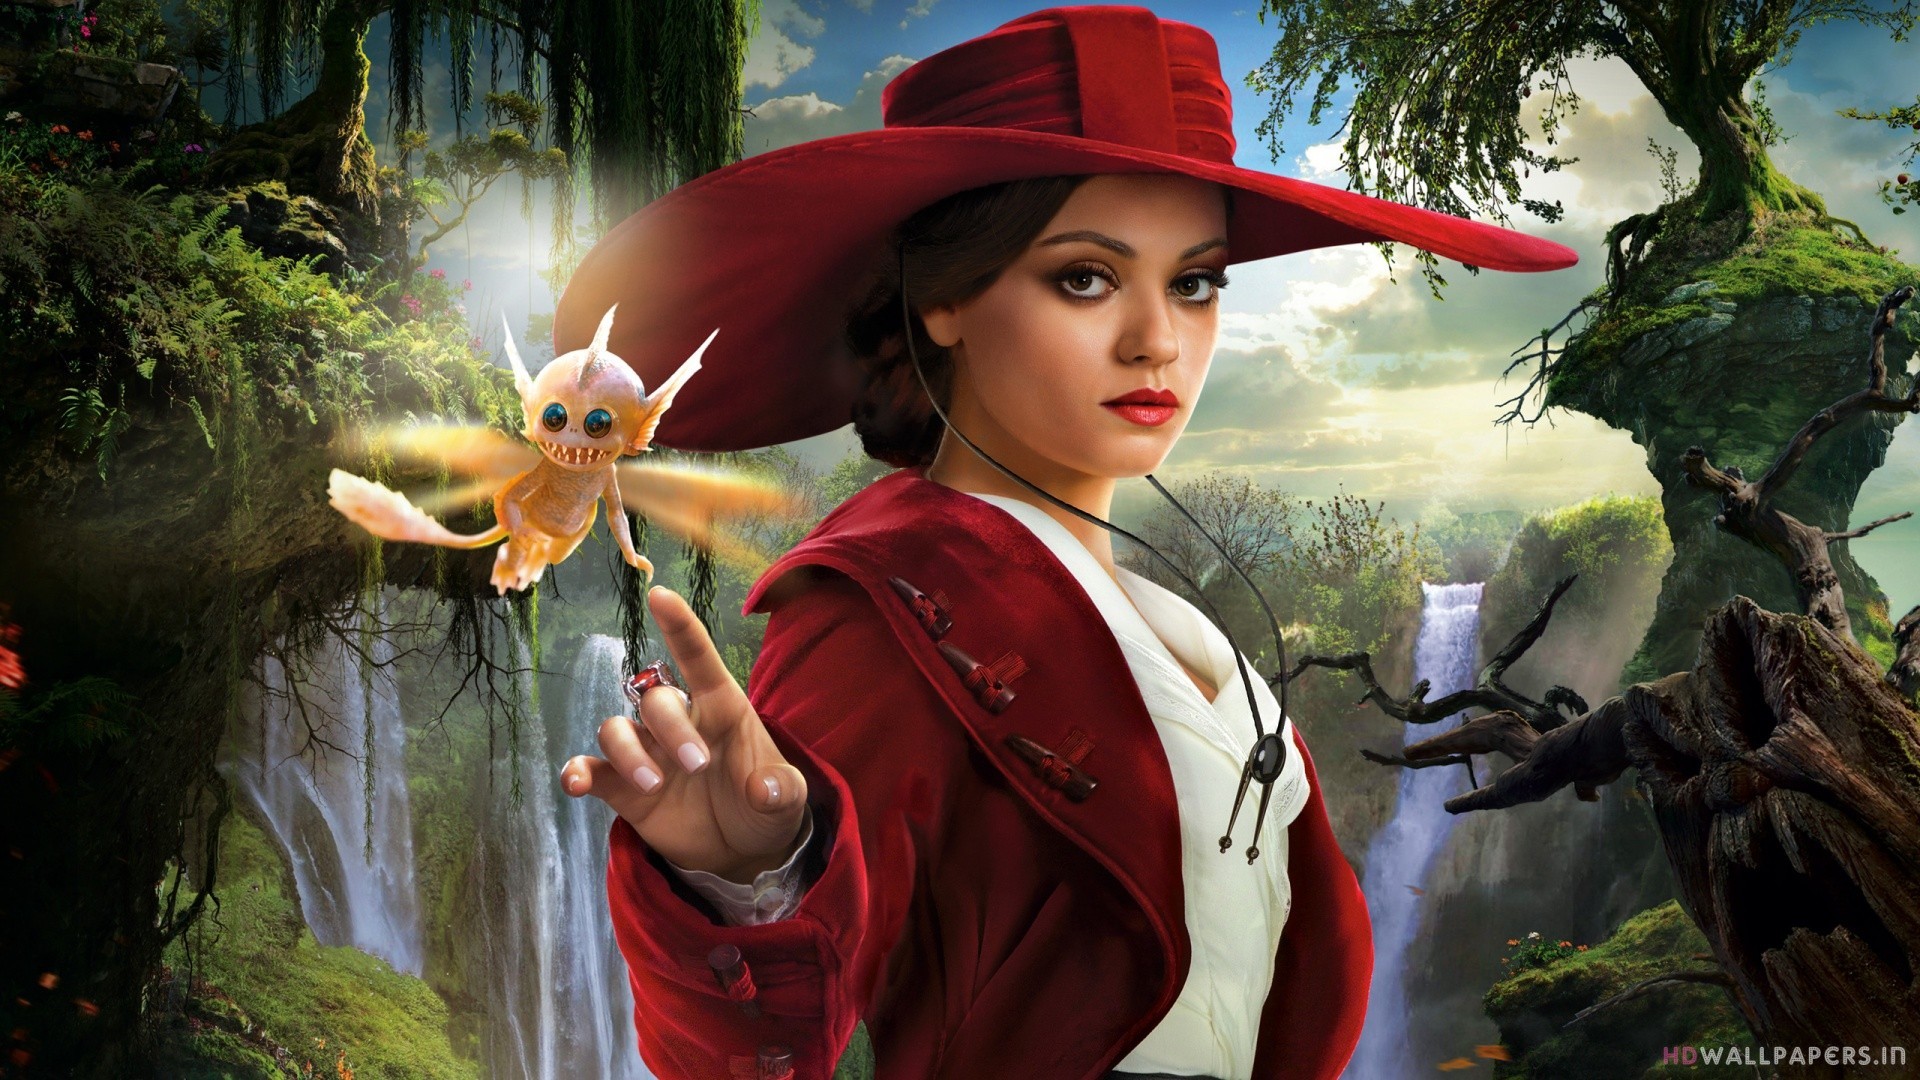 People 1920x1080 movies Oz the Great and Powerful Mila Kunis women red hats tied hair hand gesture brown eyes fantasy girl closed mouth women with hats hat looking at viewer digital art watermarked